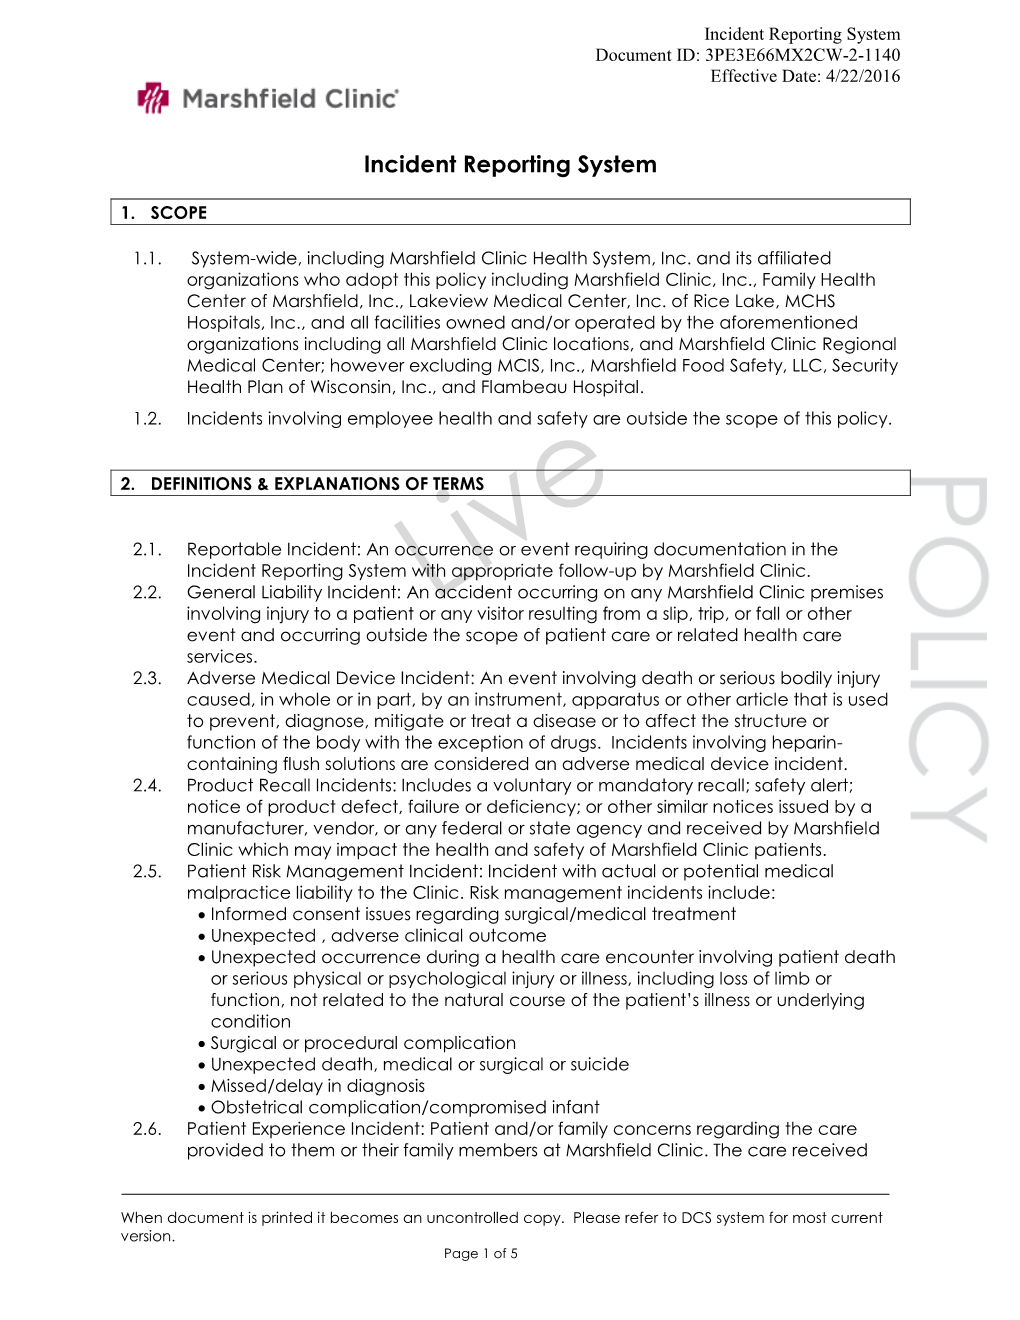 Marshfield Clinic Incident Reporting System Policy